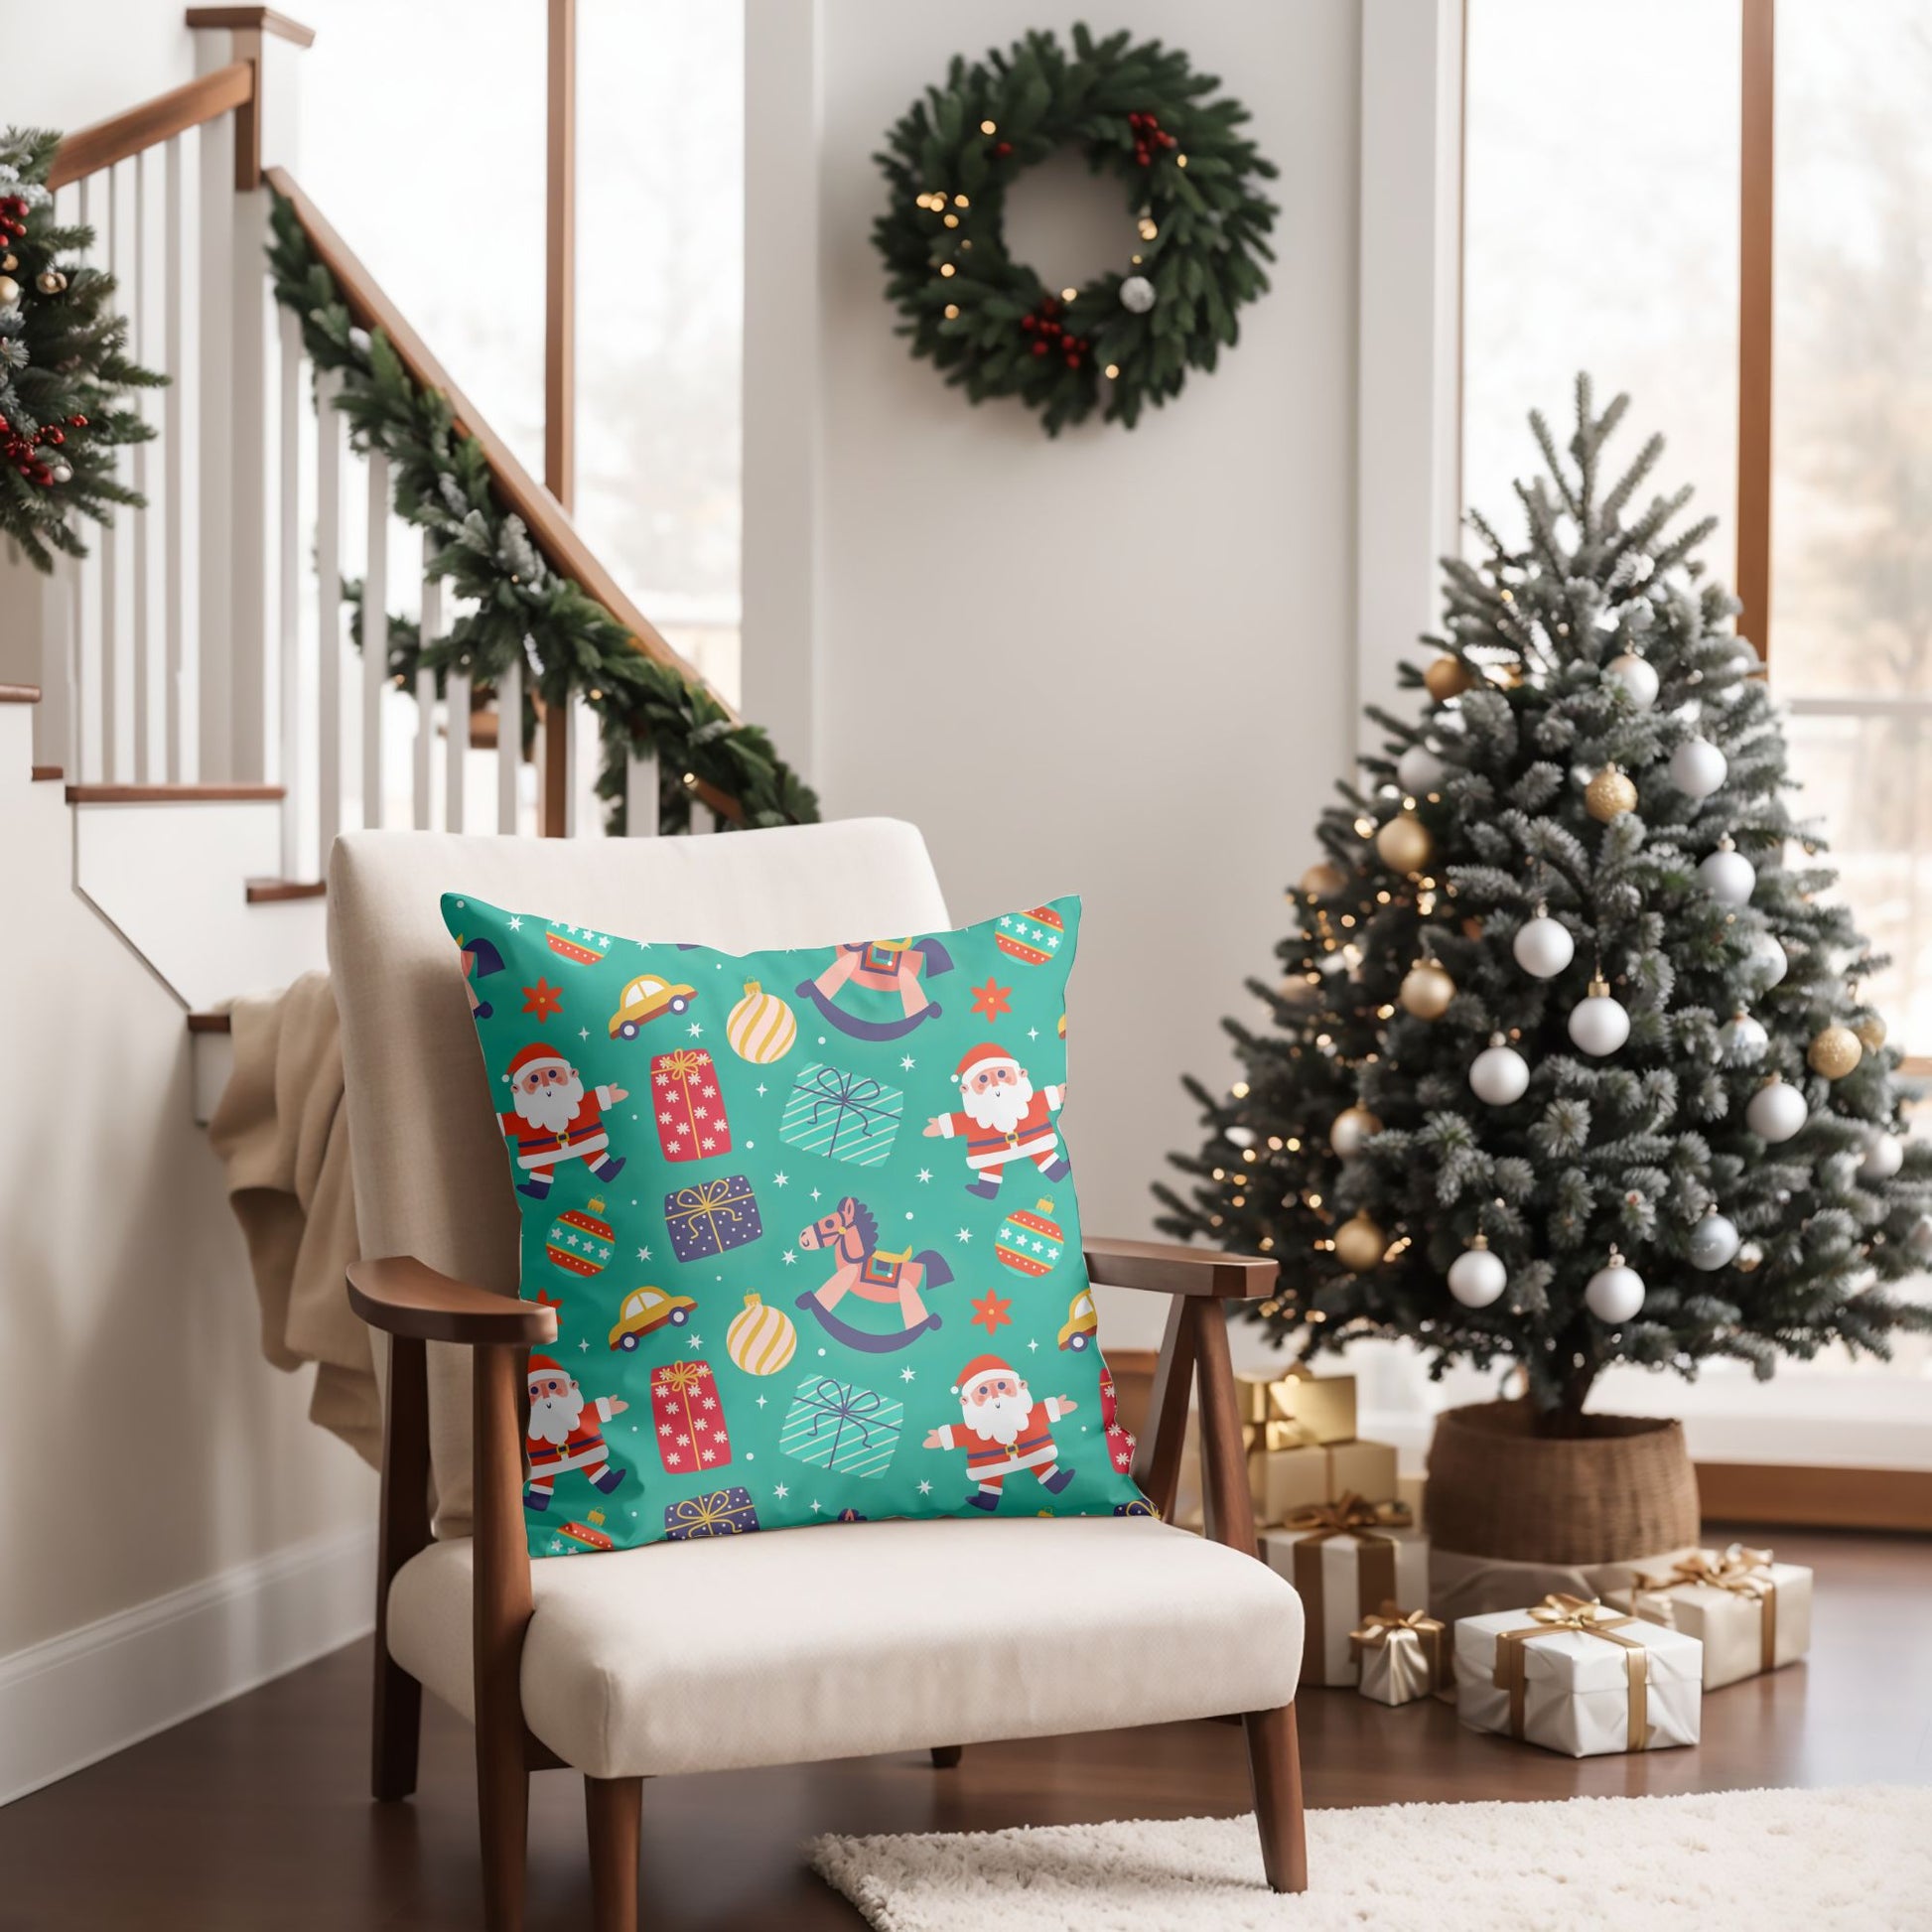 Cute Green Christmas Pillow for Kids' Bedroom